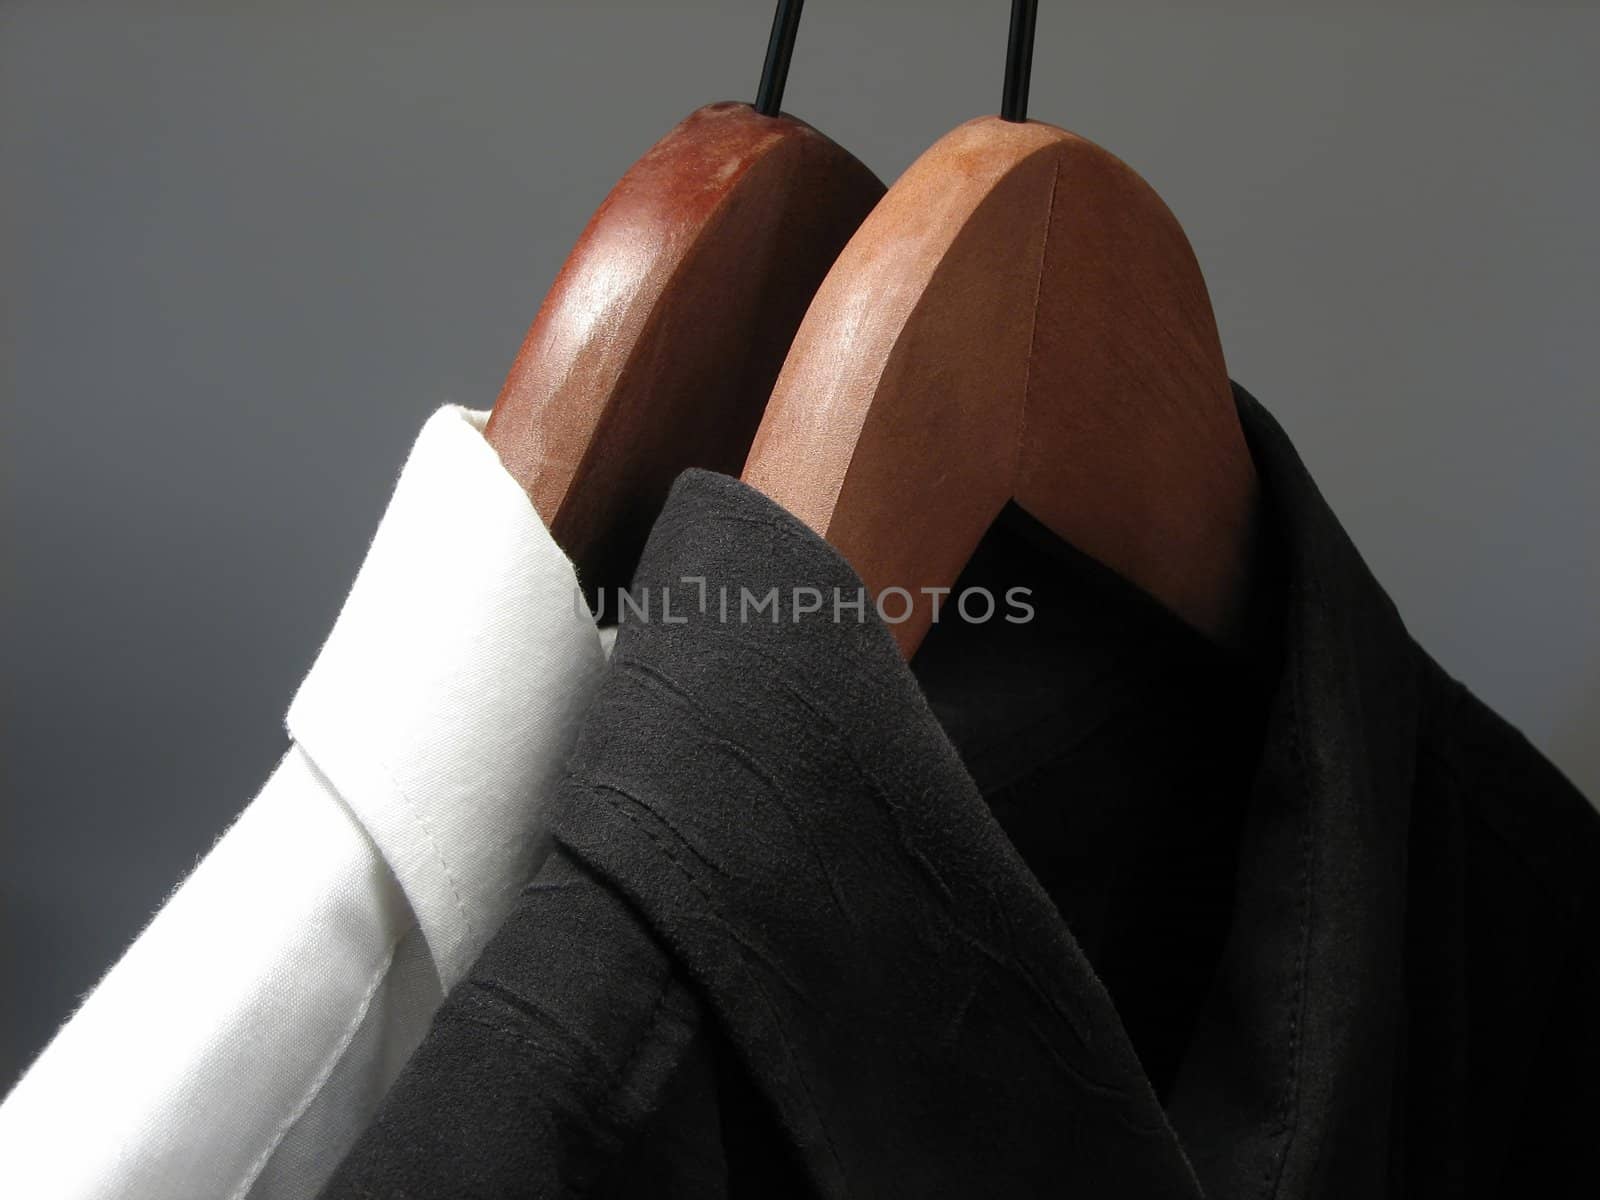 Stylish black and white shirts on wooden hangers.